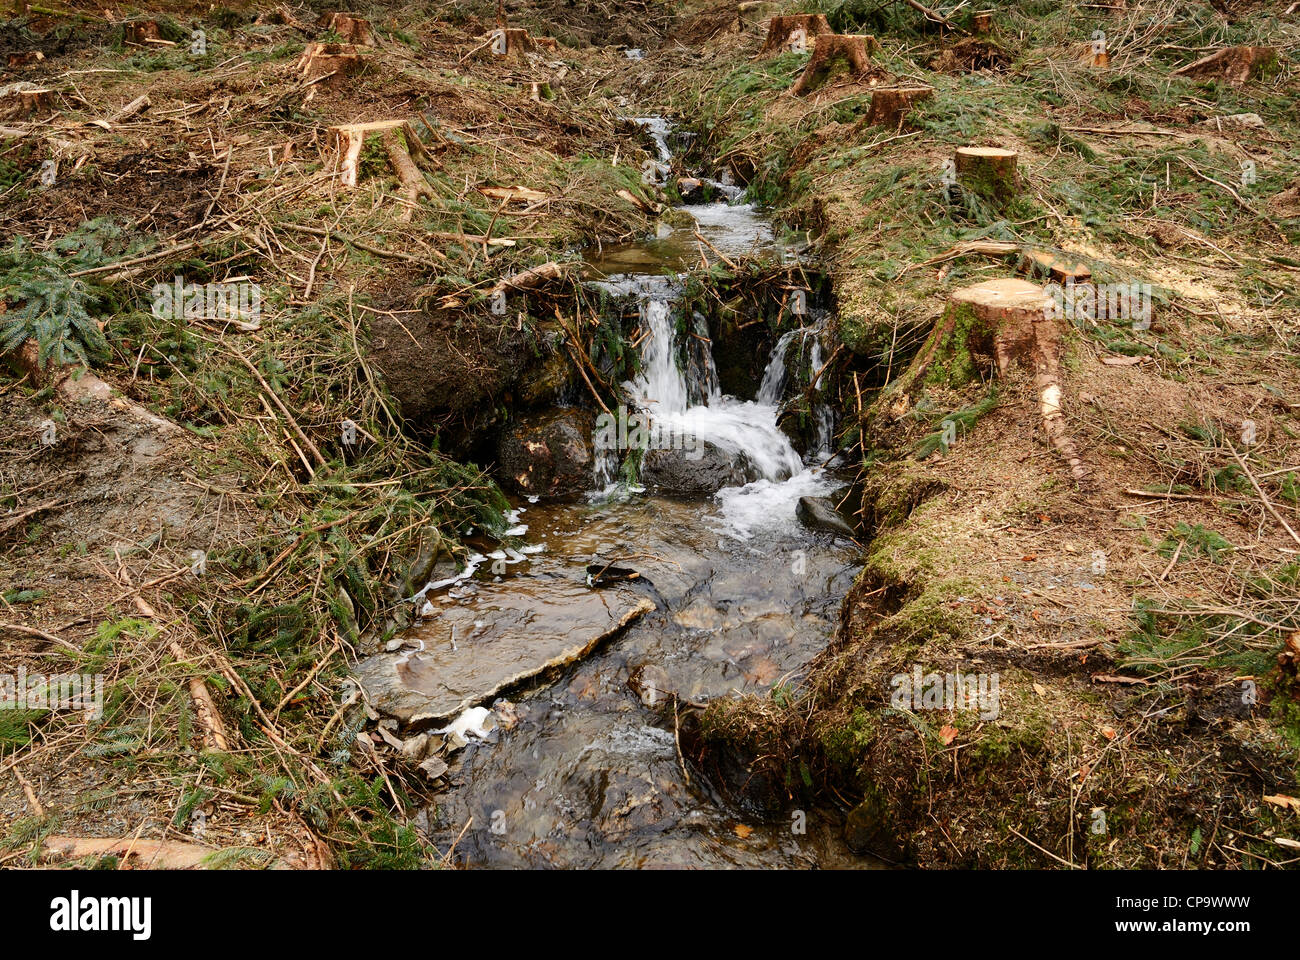 Small stream clogged with forestry debris after felling operations. Stock Photo